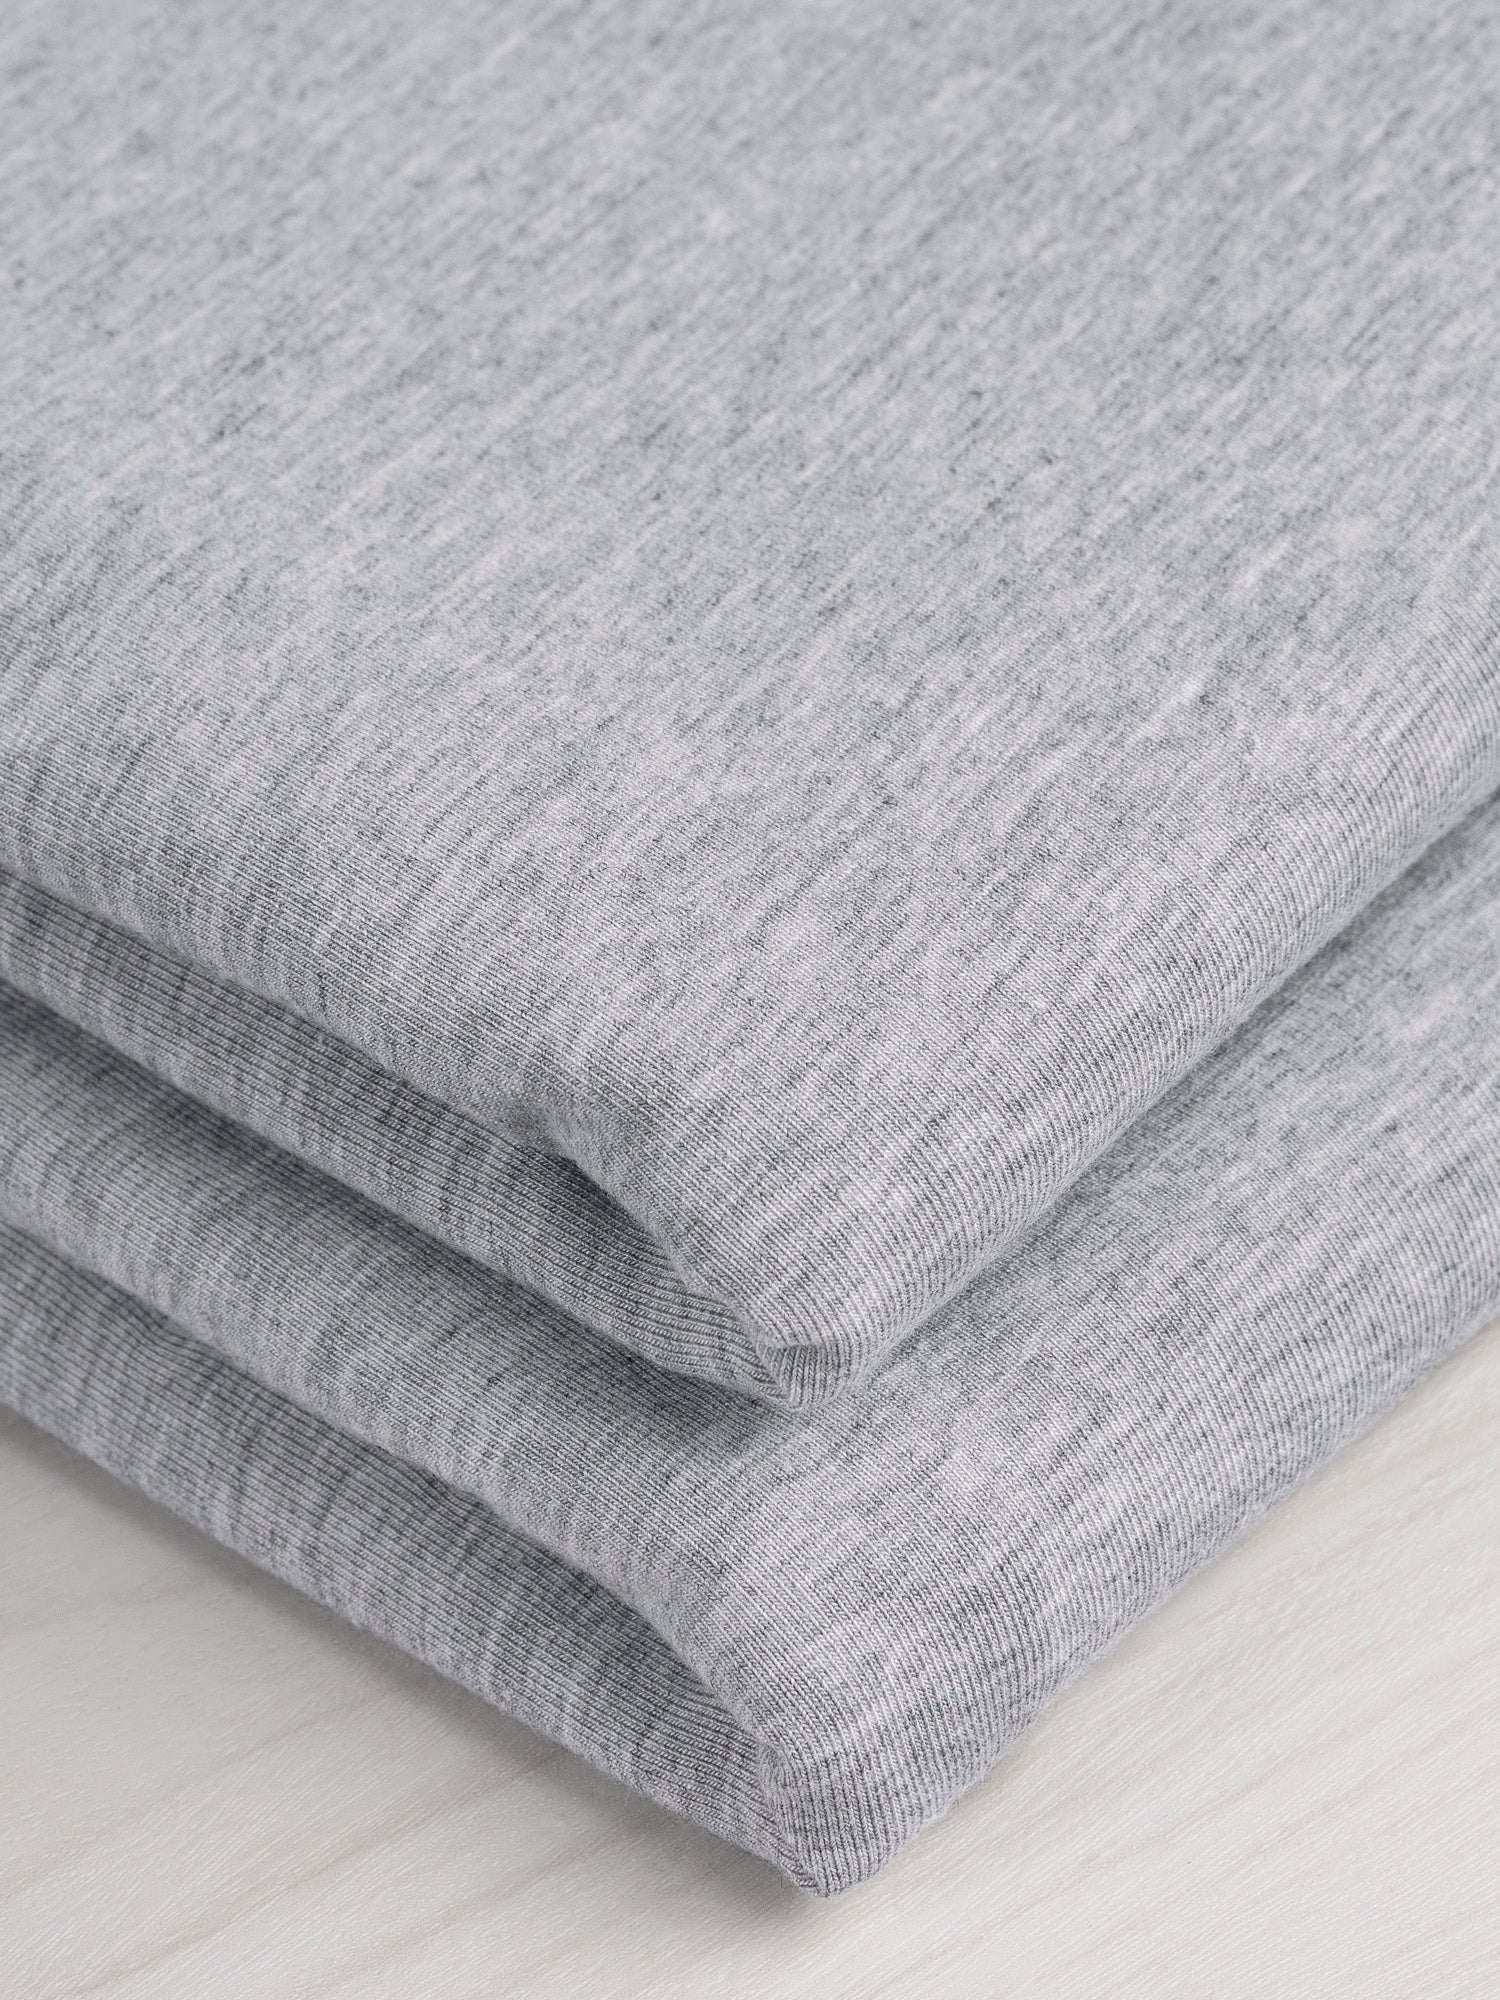 Substantial Tencel + Organic Cotton Stretch Jersey Knit - Heather Grey